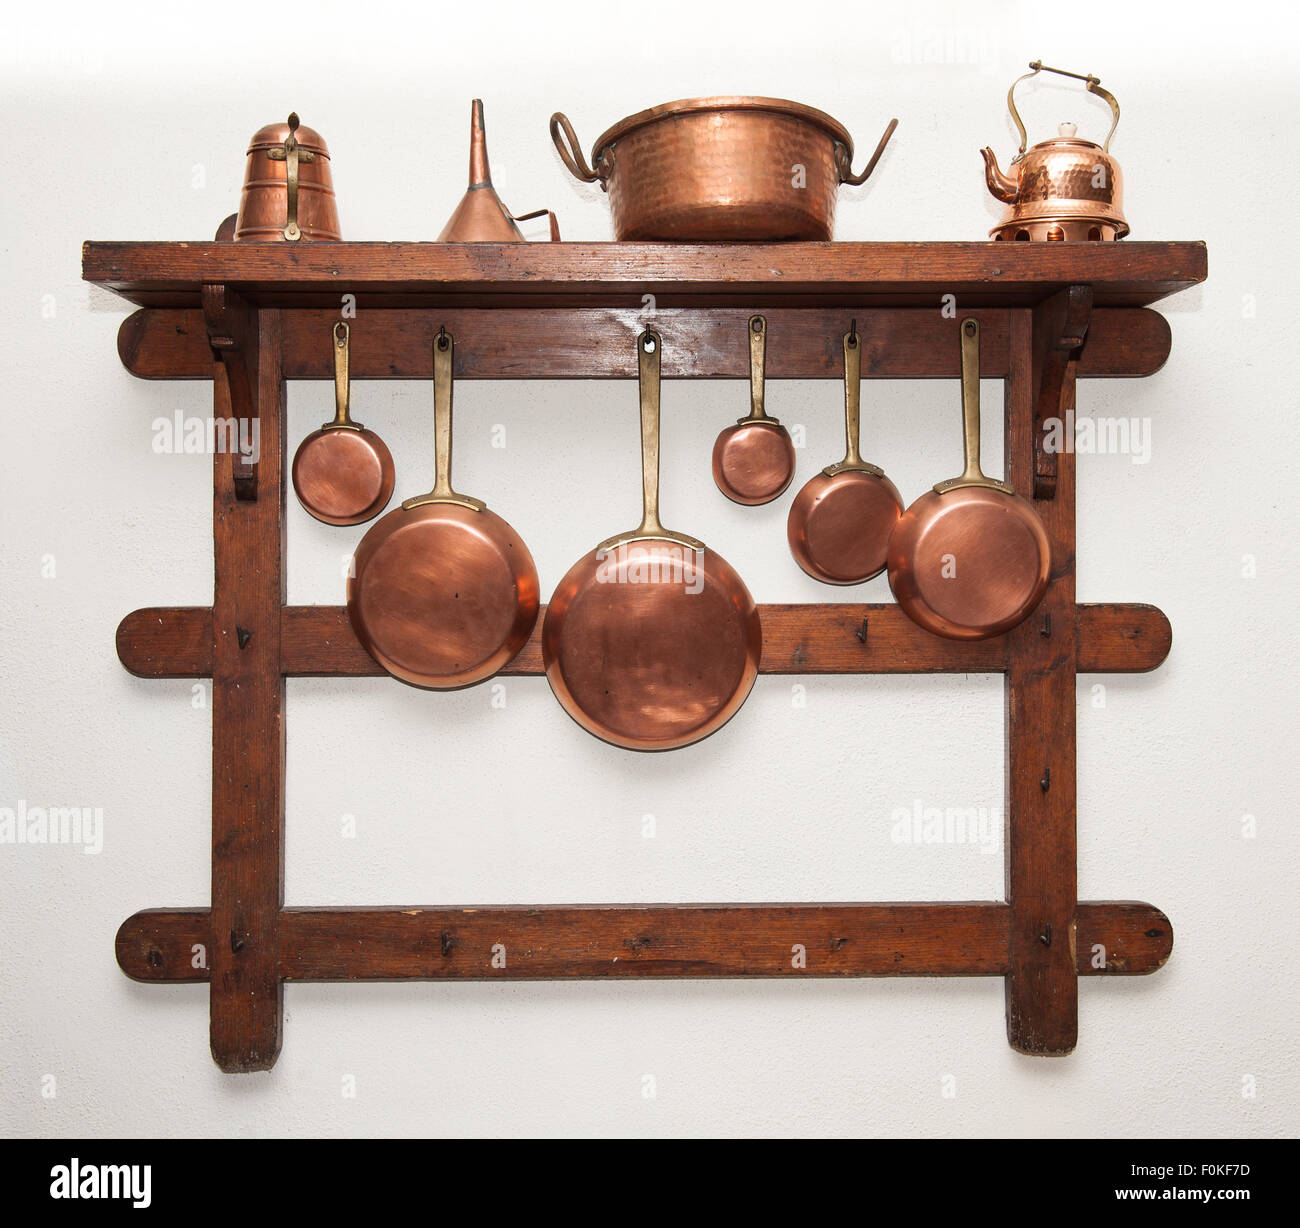 Different kind of vintage copper cookware, pans, coffee pot and funnel hung on wooden shelf in kitchen Stock Photo